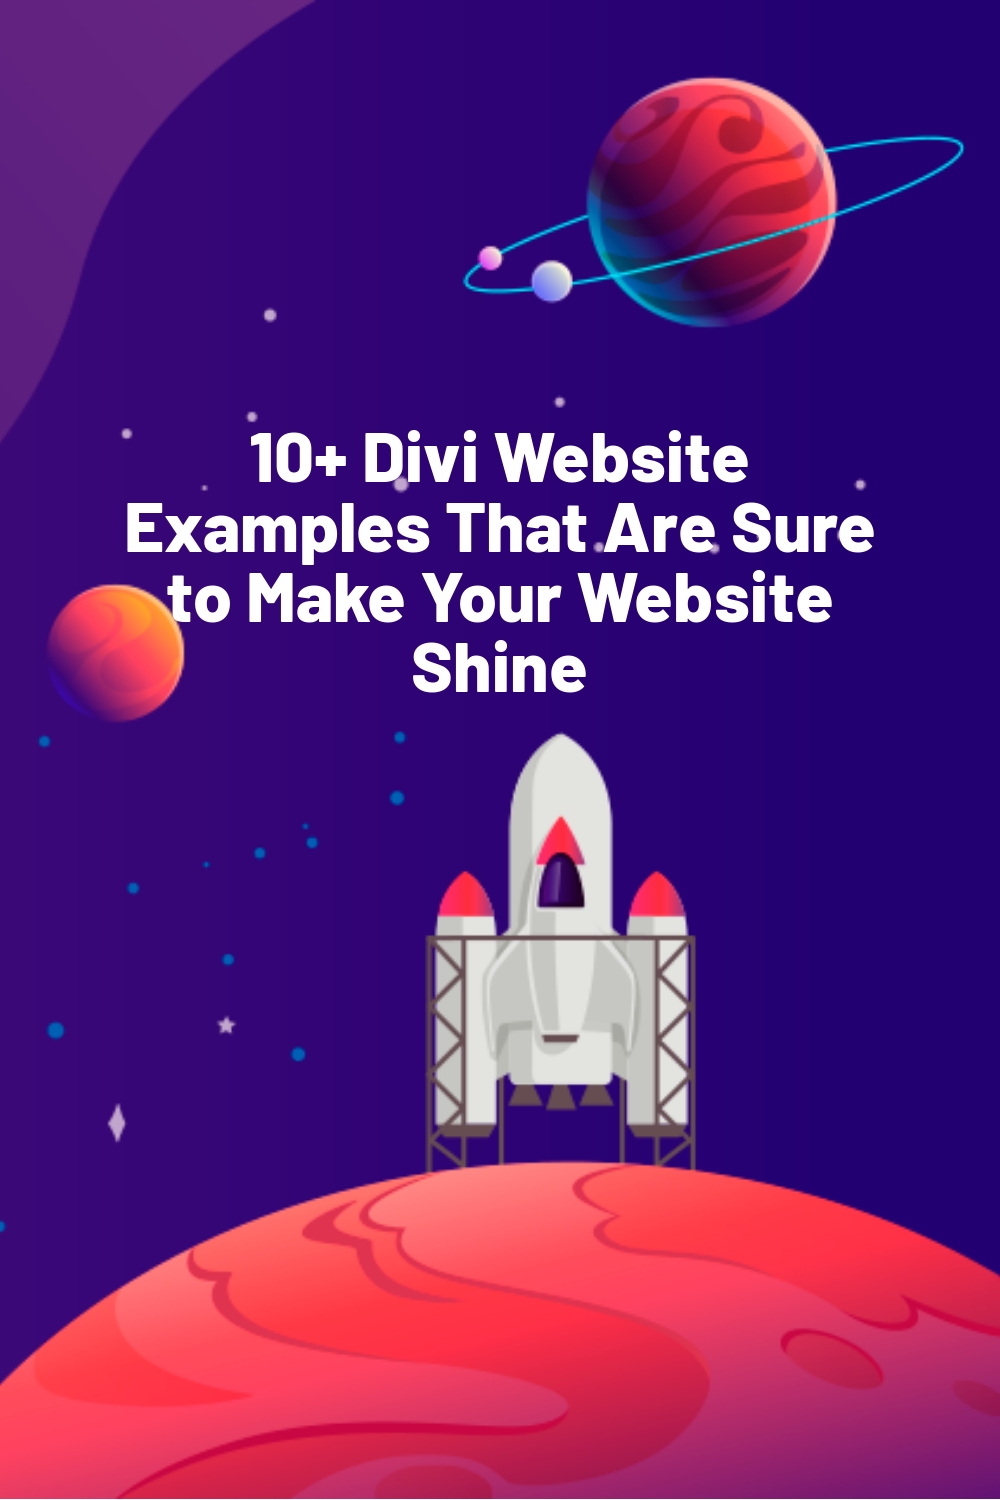 10+ Divi Website Examples That Are Sure to Make Your Website Shine